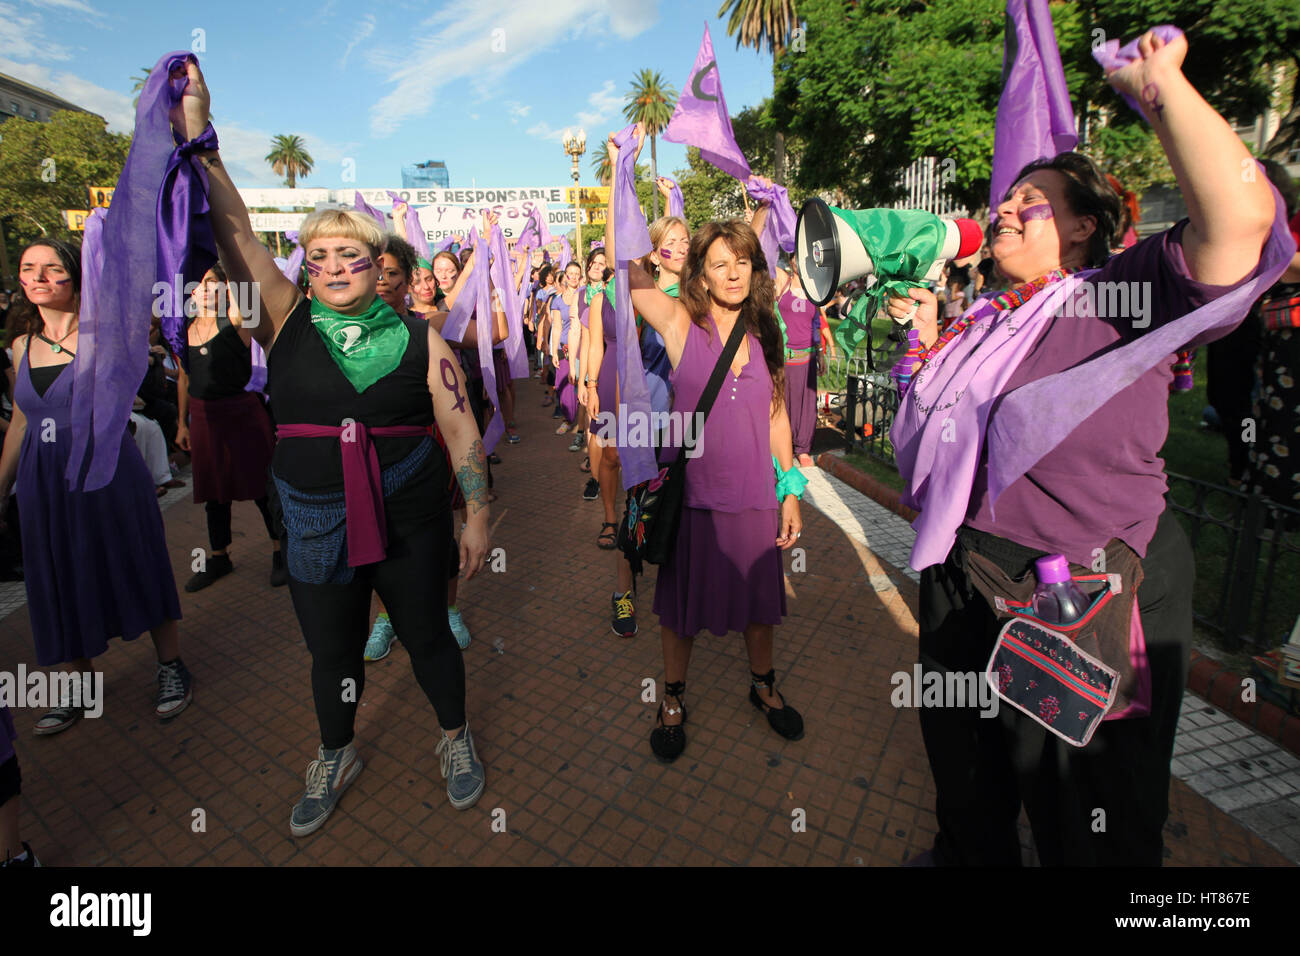 Buenos Aires, Argentina. 8th Mar, 2017. Gathering under the slogan Ni Una Menos hundreds of thousands of women across Argentina yesterday protested against gender violence and femicide in mass rallies across many cities, including Buenos Aires City, marching from the Congreso (Parliament) to the Plaza de Mayo. Credit: Claudio Santisteban/ZUMA Wire/Alamy Live News Stock Photo